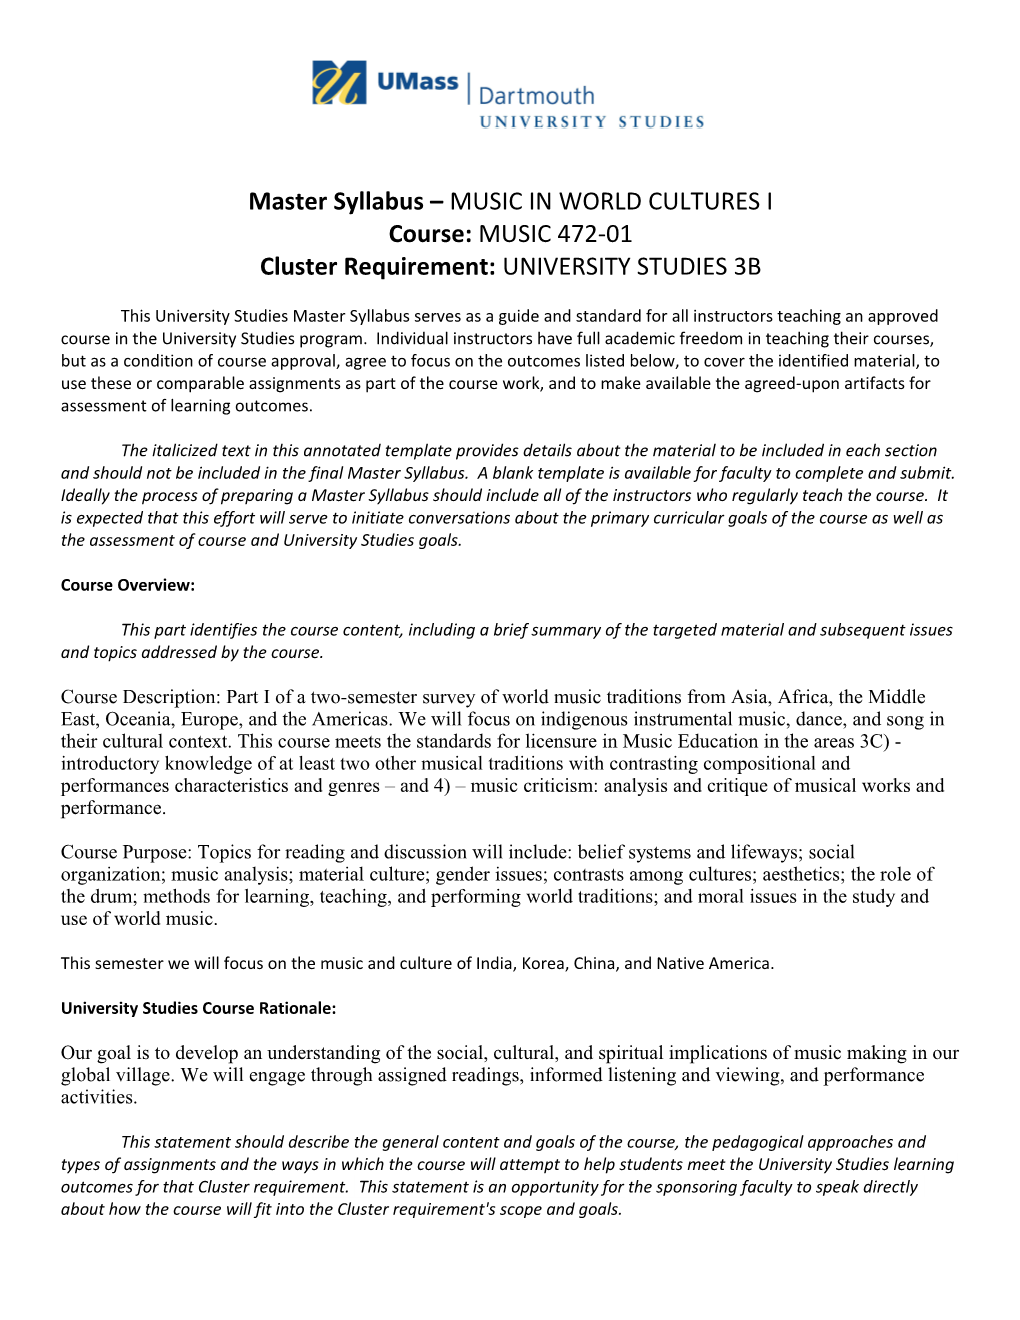 Master Syllabus MUSIC in WORLD CULTURES I